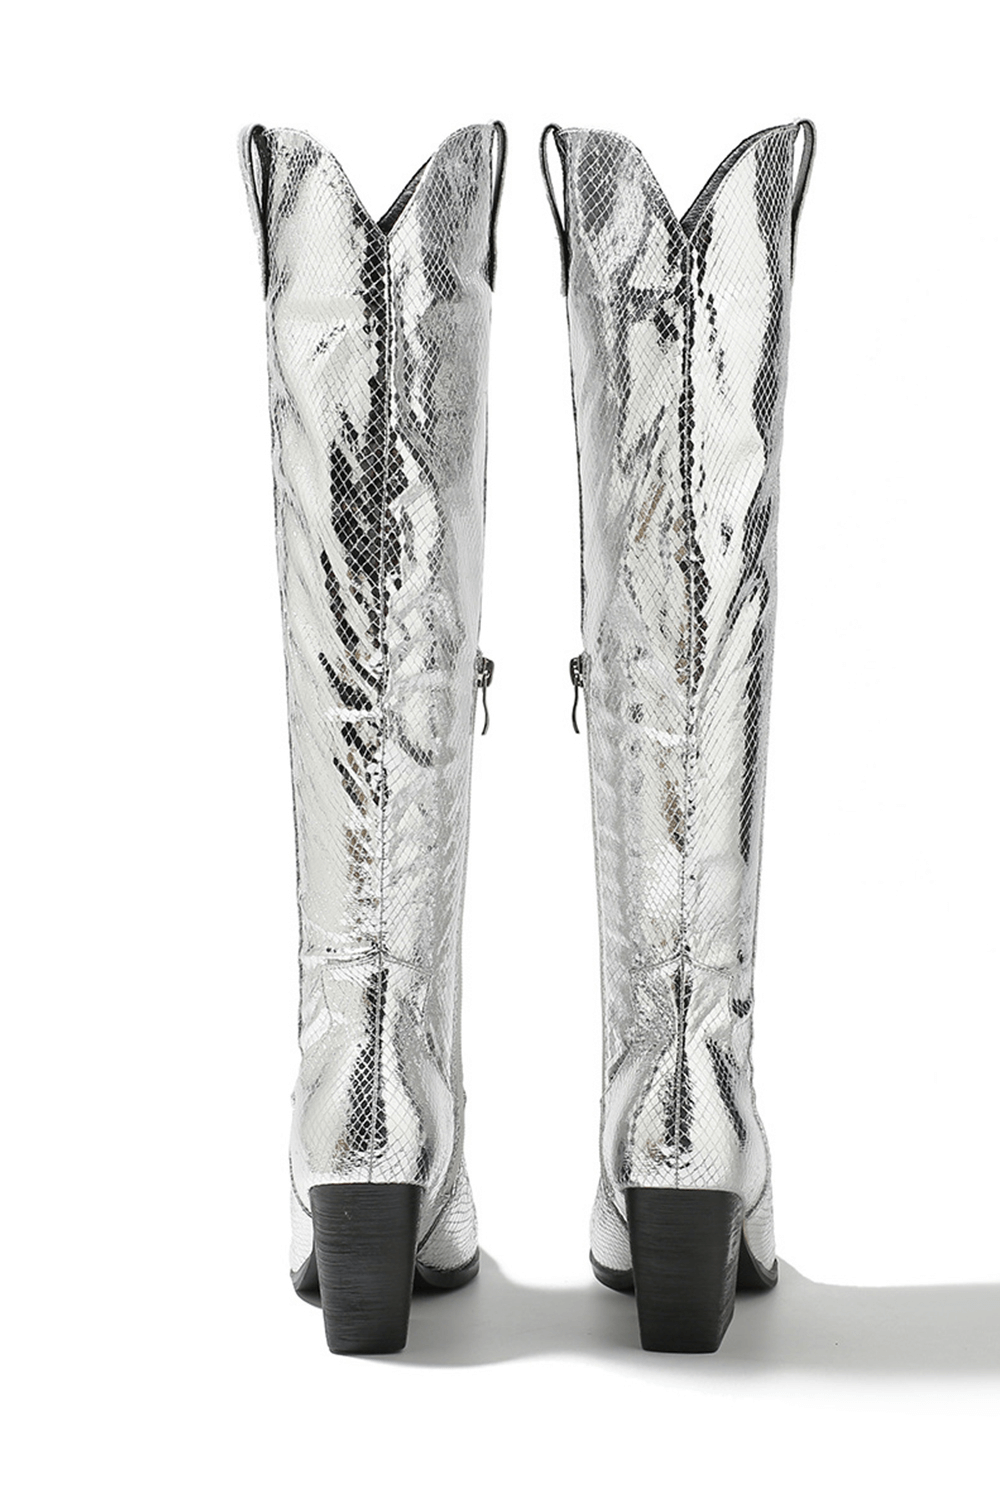 Metallic Python Western Cowgirl Pointed Toe Knee High Boot - Siver